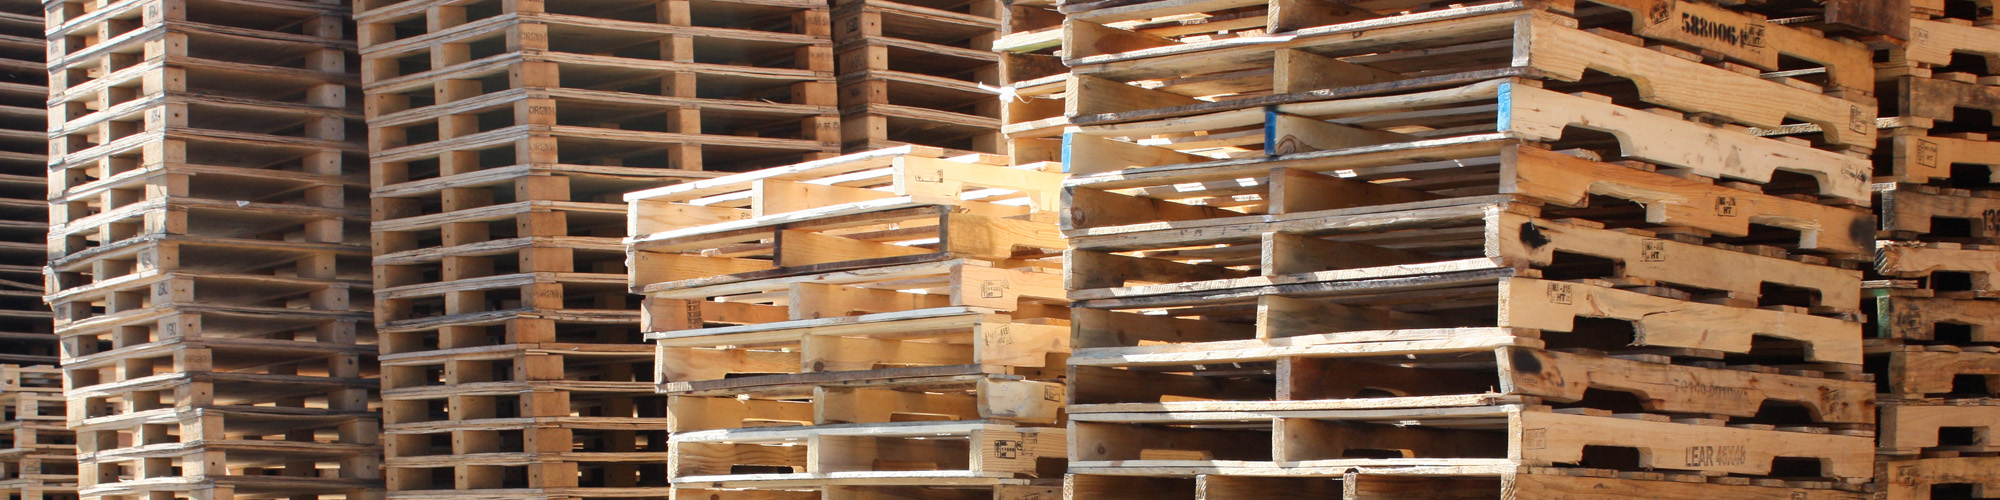 Pallets from Pallet Sales & Recycling